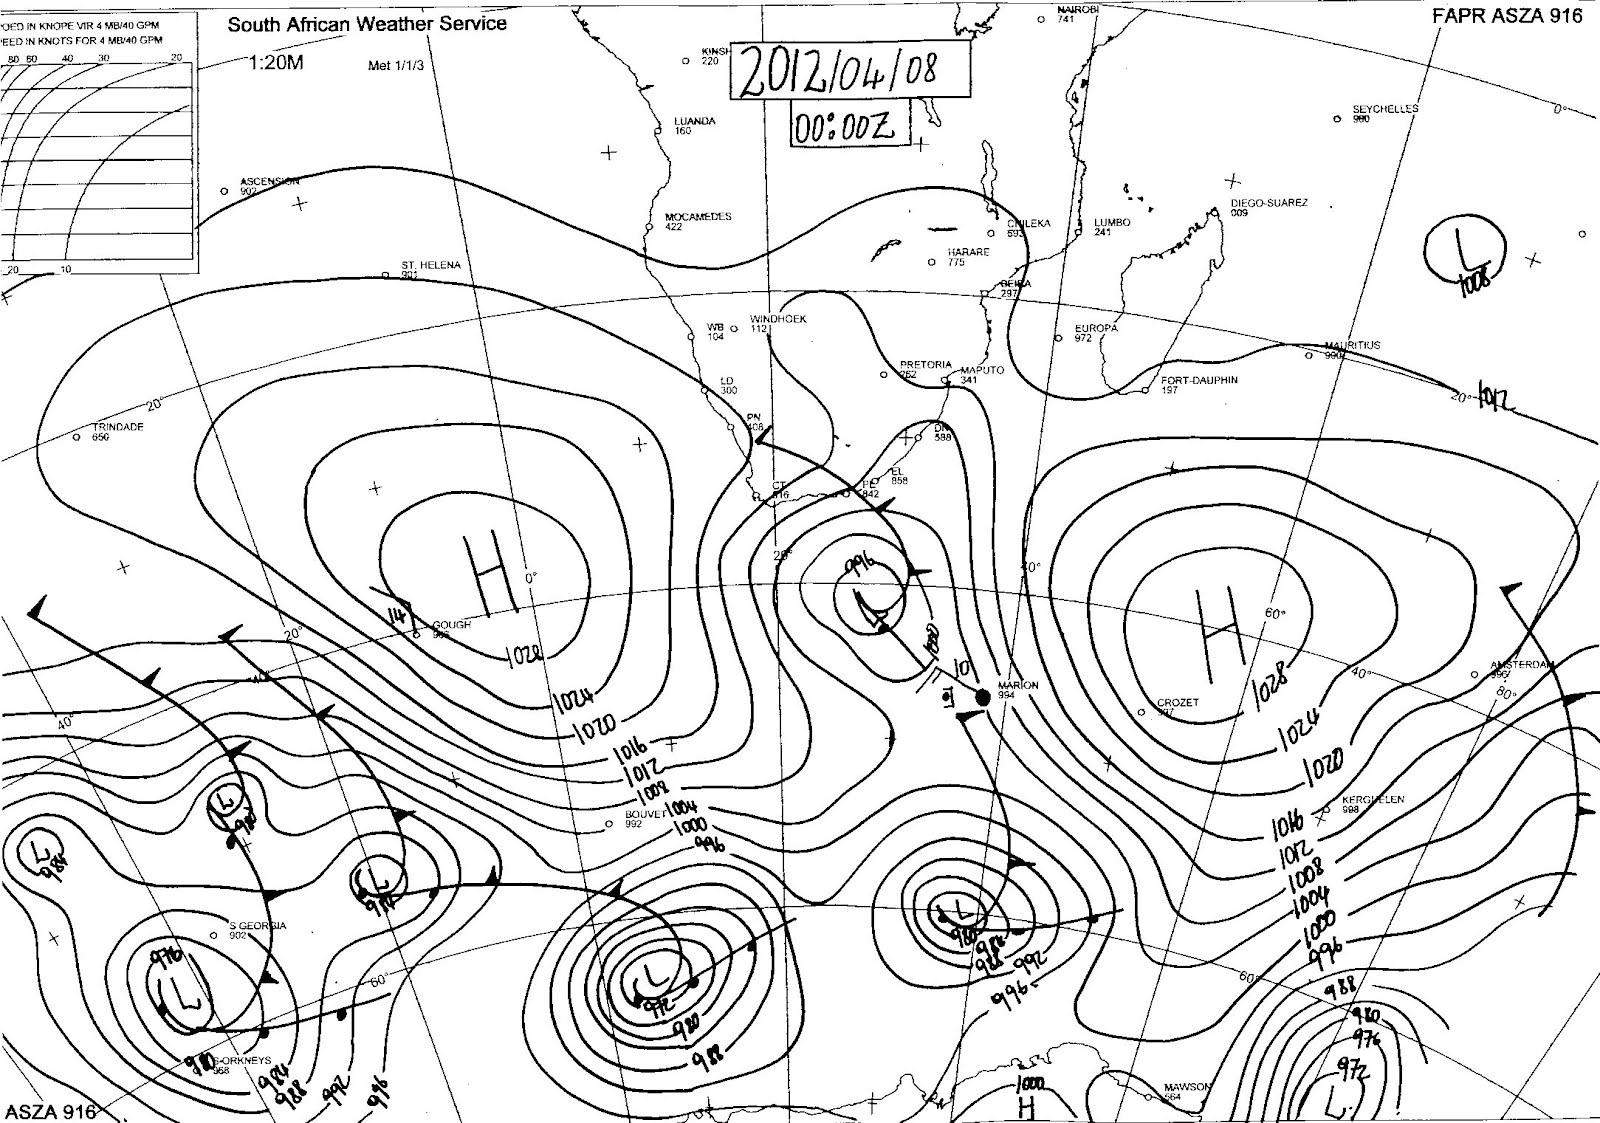 Features Of A Synoptic Chart - Lamer